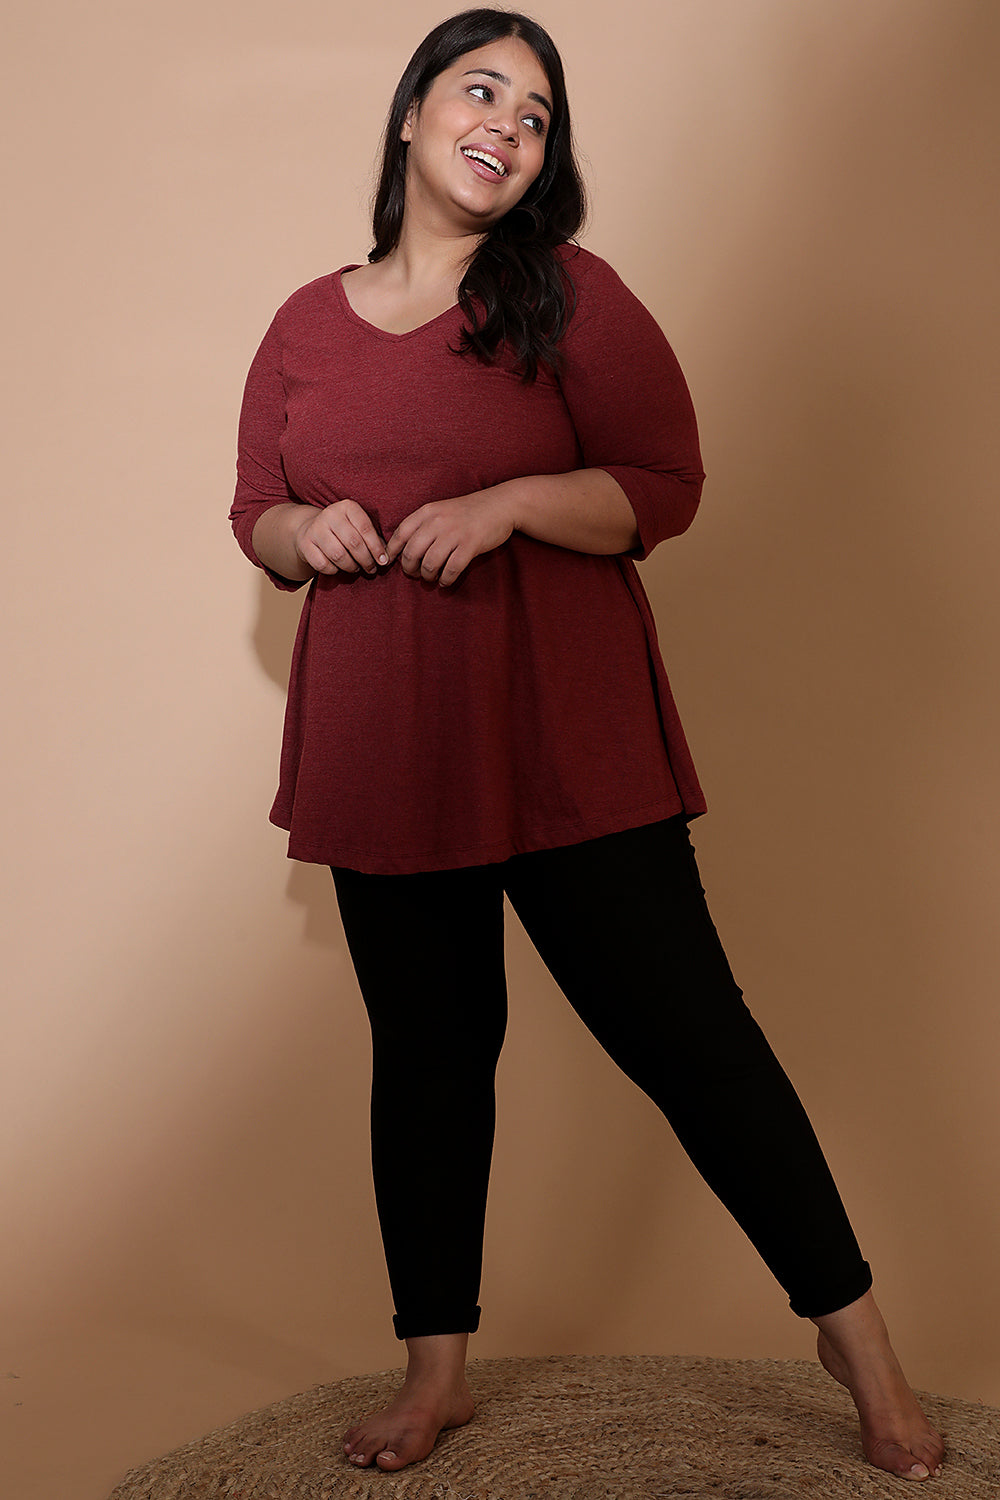 Clearance Sale - Plus Size Womens Clothing At Unbeatable Prices